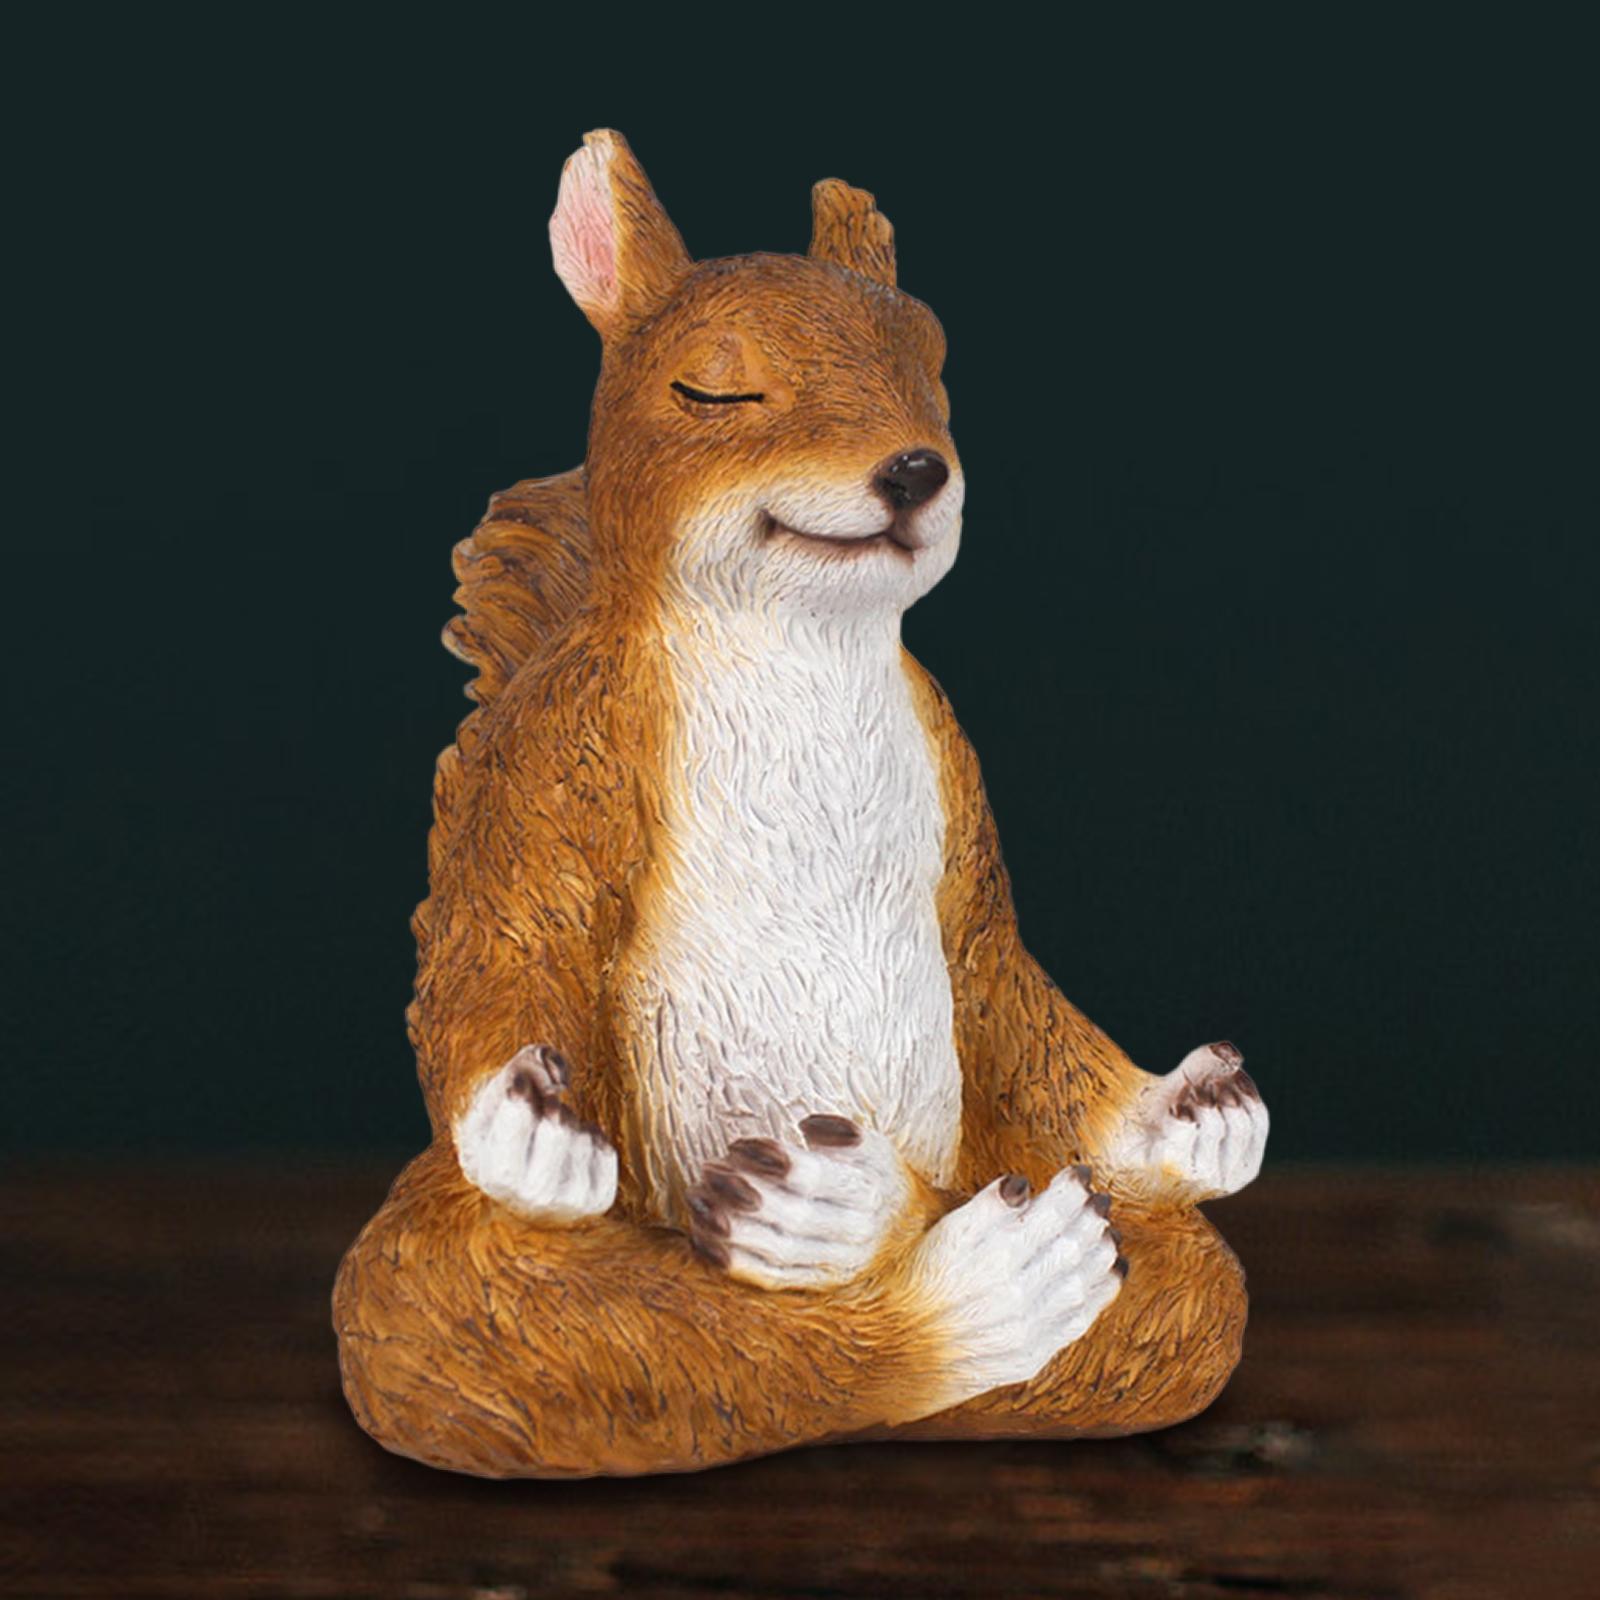 Squirrel Statue Sculptures Figurines Modern Living Room Home Accessories